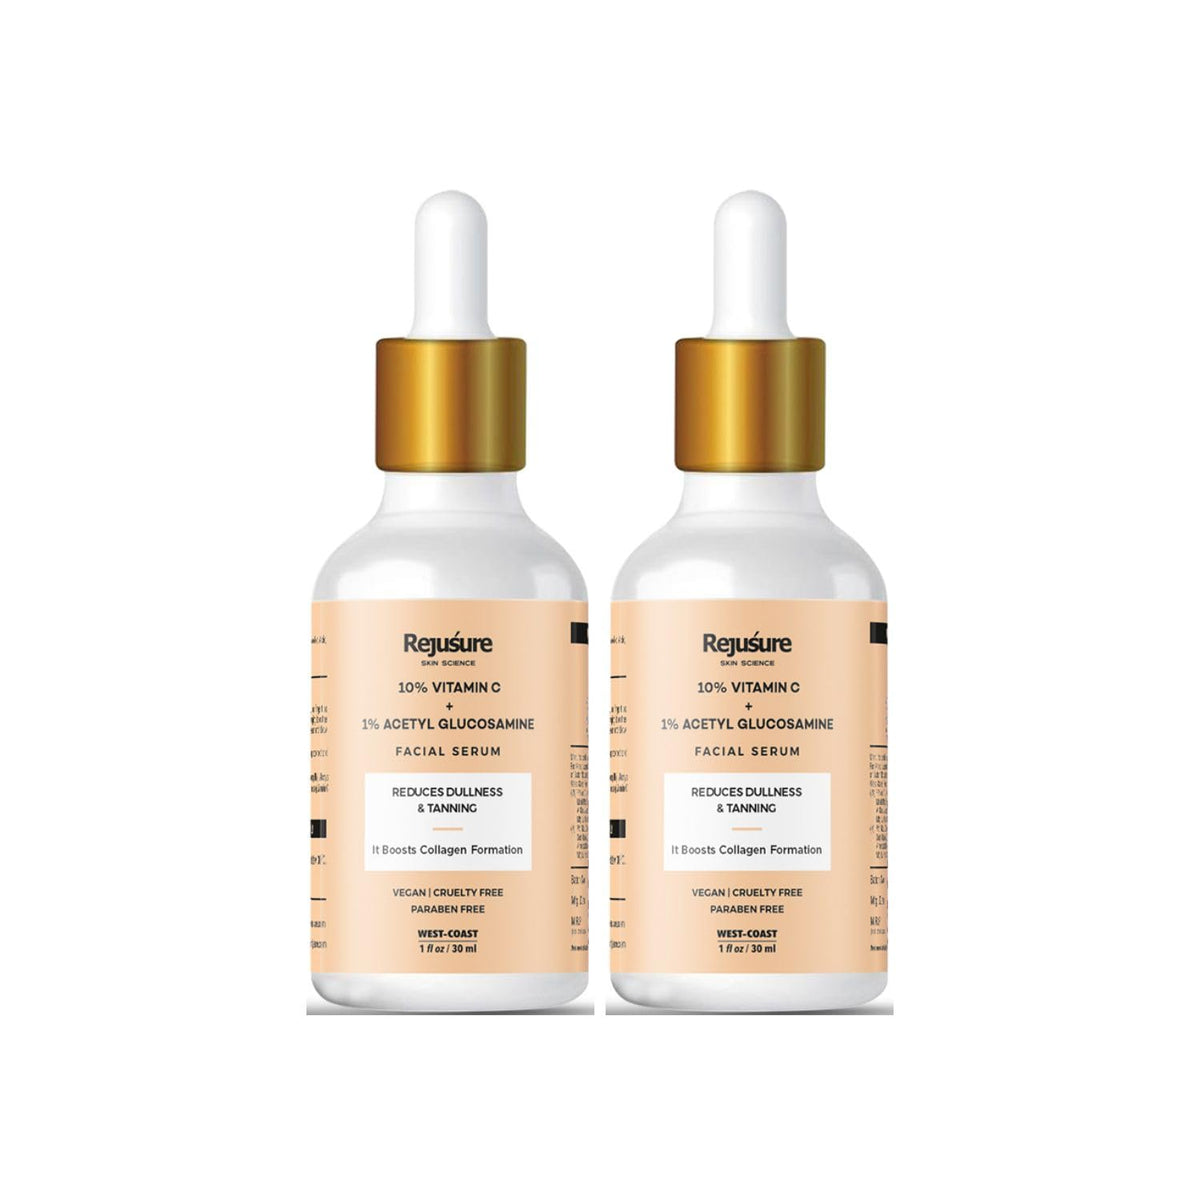 Rejusure 10% Vitamin C + 1% Acetyl Glucosamine Facial Serum to Boots Collagen Production & Protects from Environmental Stress– 30ml (Pack of 2)